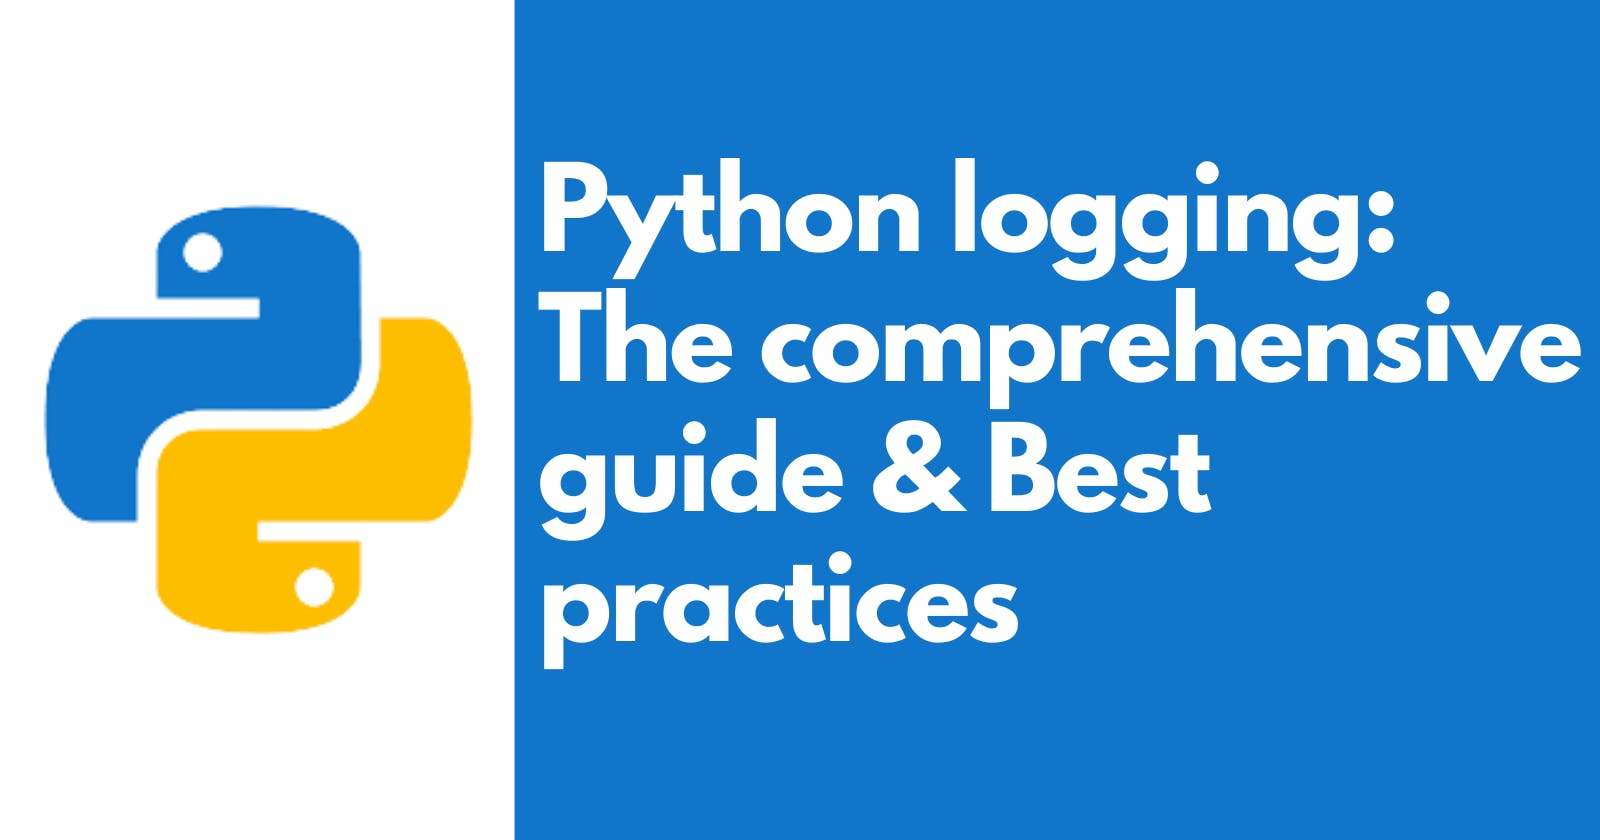 Python logging: The Comprehensive guide and Best practices